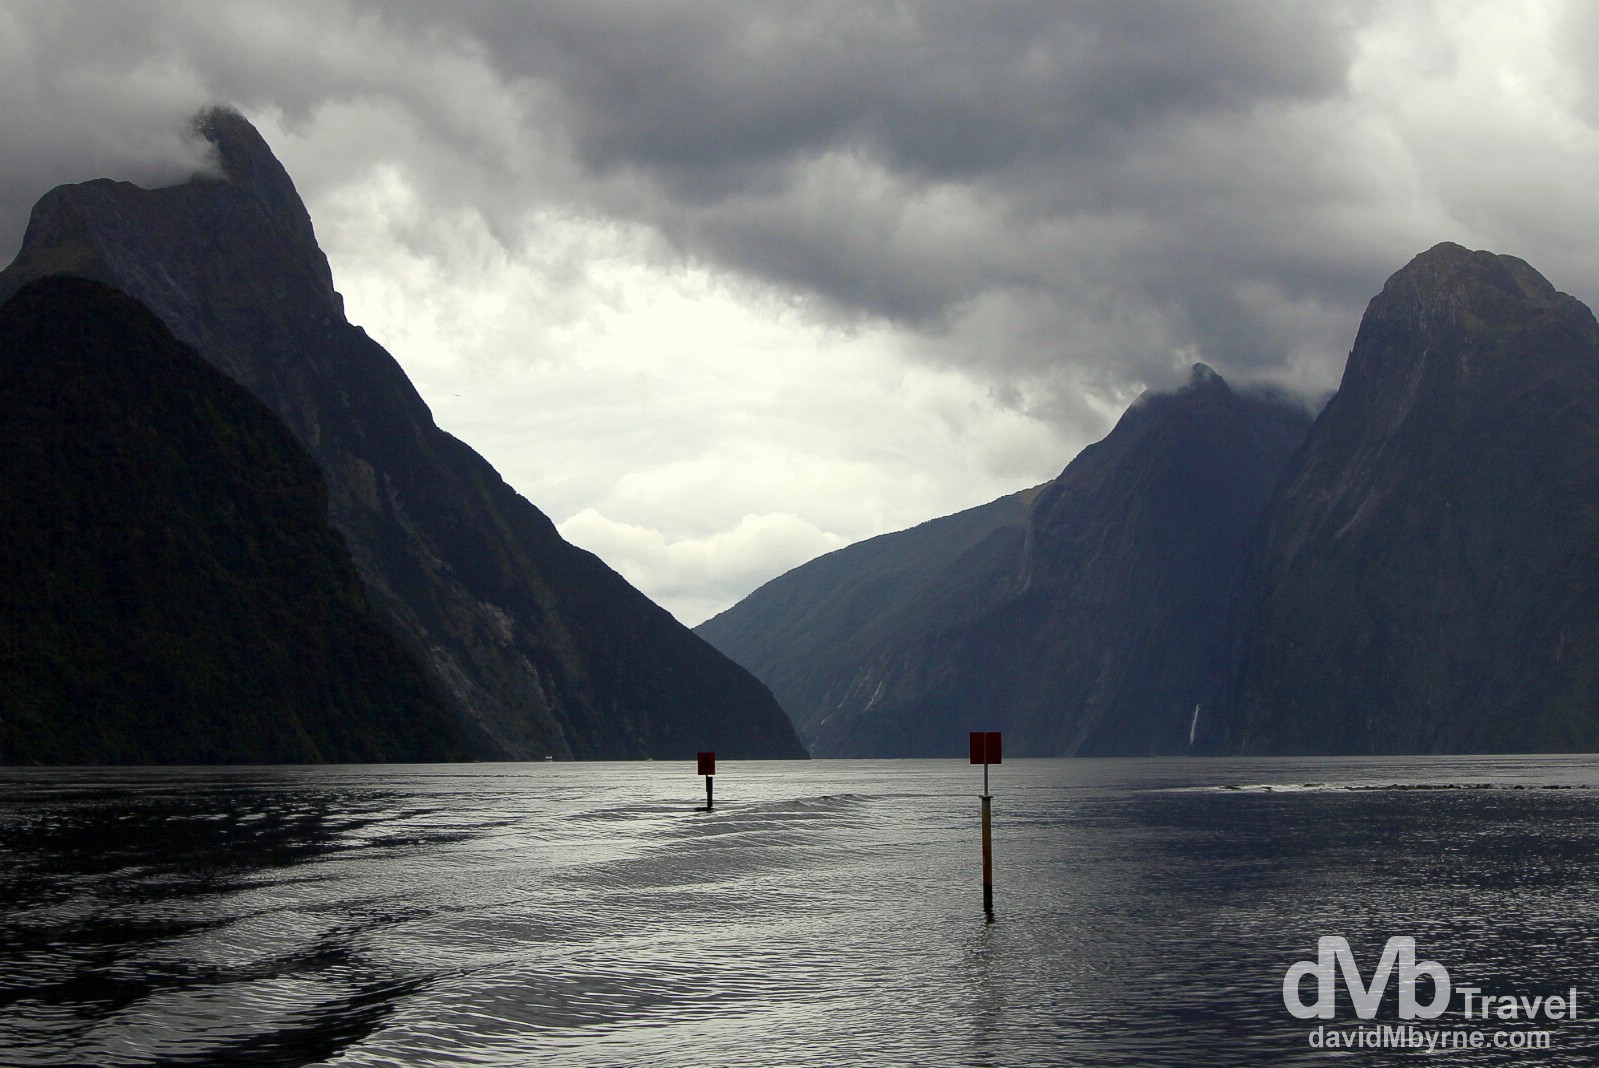 Cloud hovers over the peaks, including Mitre Peak (left), on a wet day in Milford Sound, South Island, New Zealand. May 26th 2012.